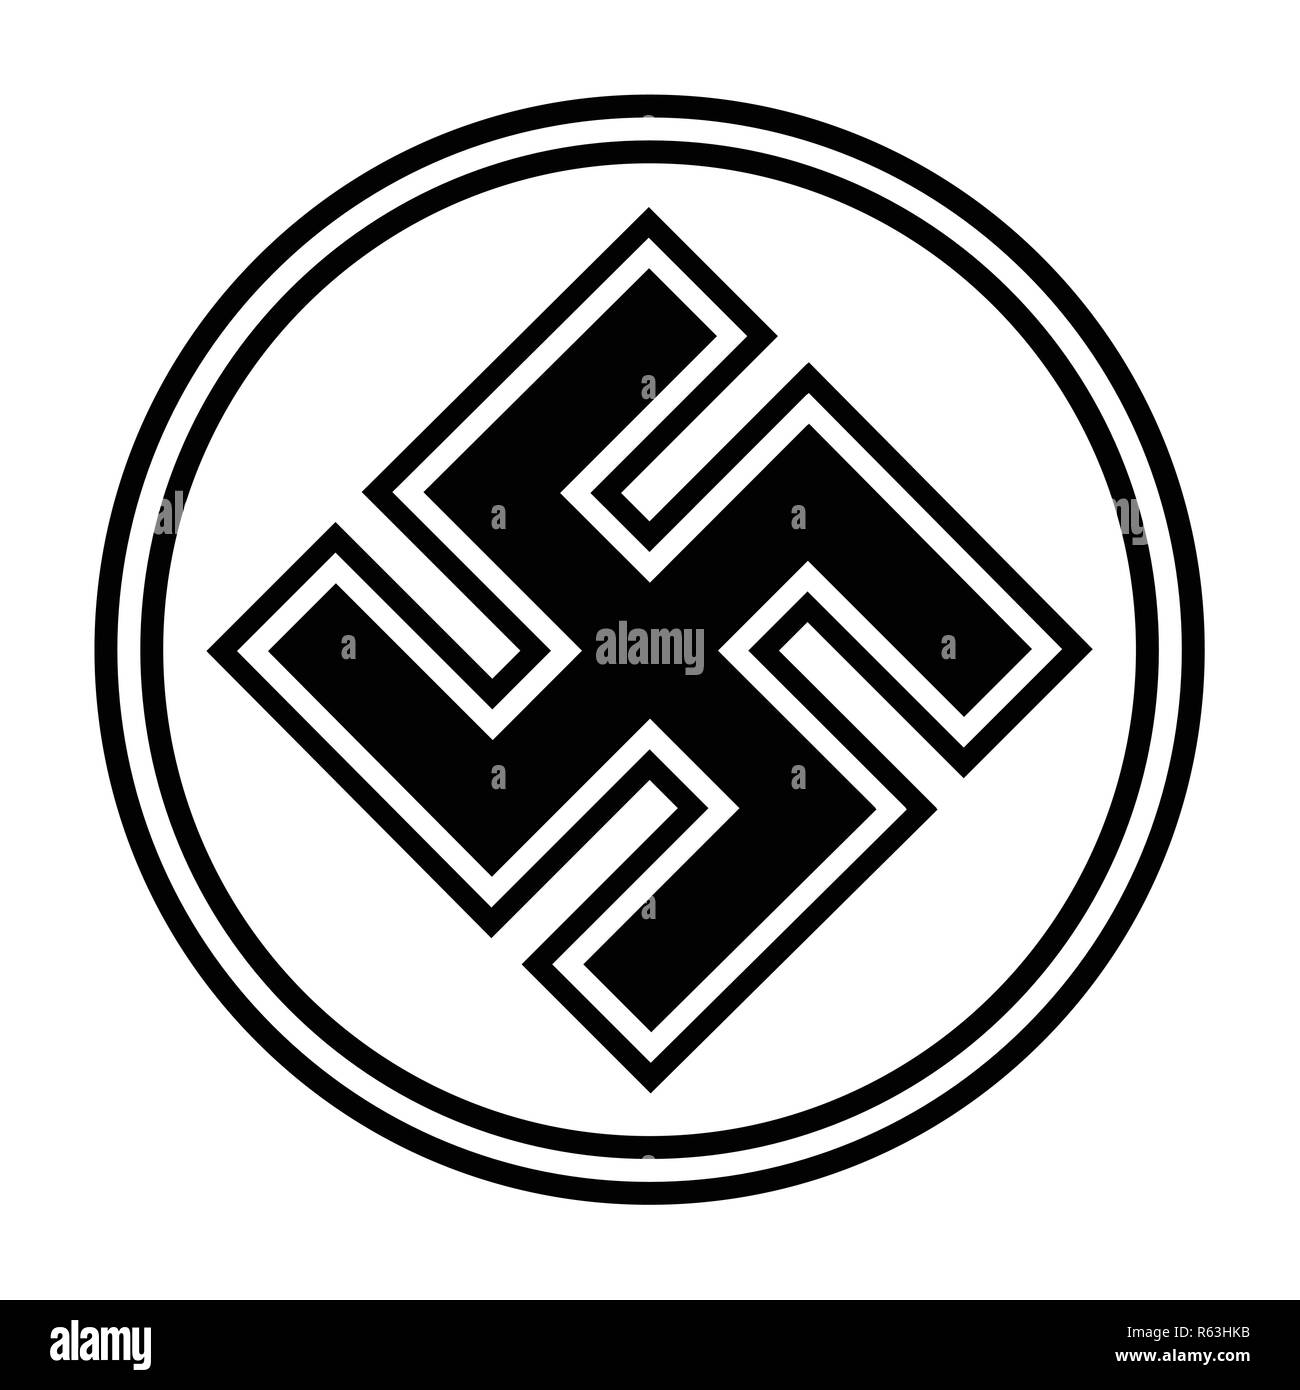 The Nazi symbol ison as used in World War two Stock Vector